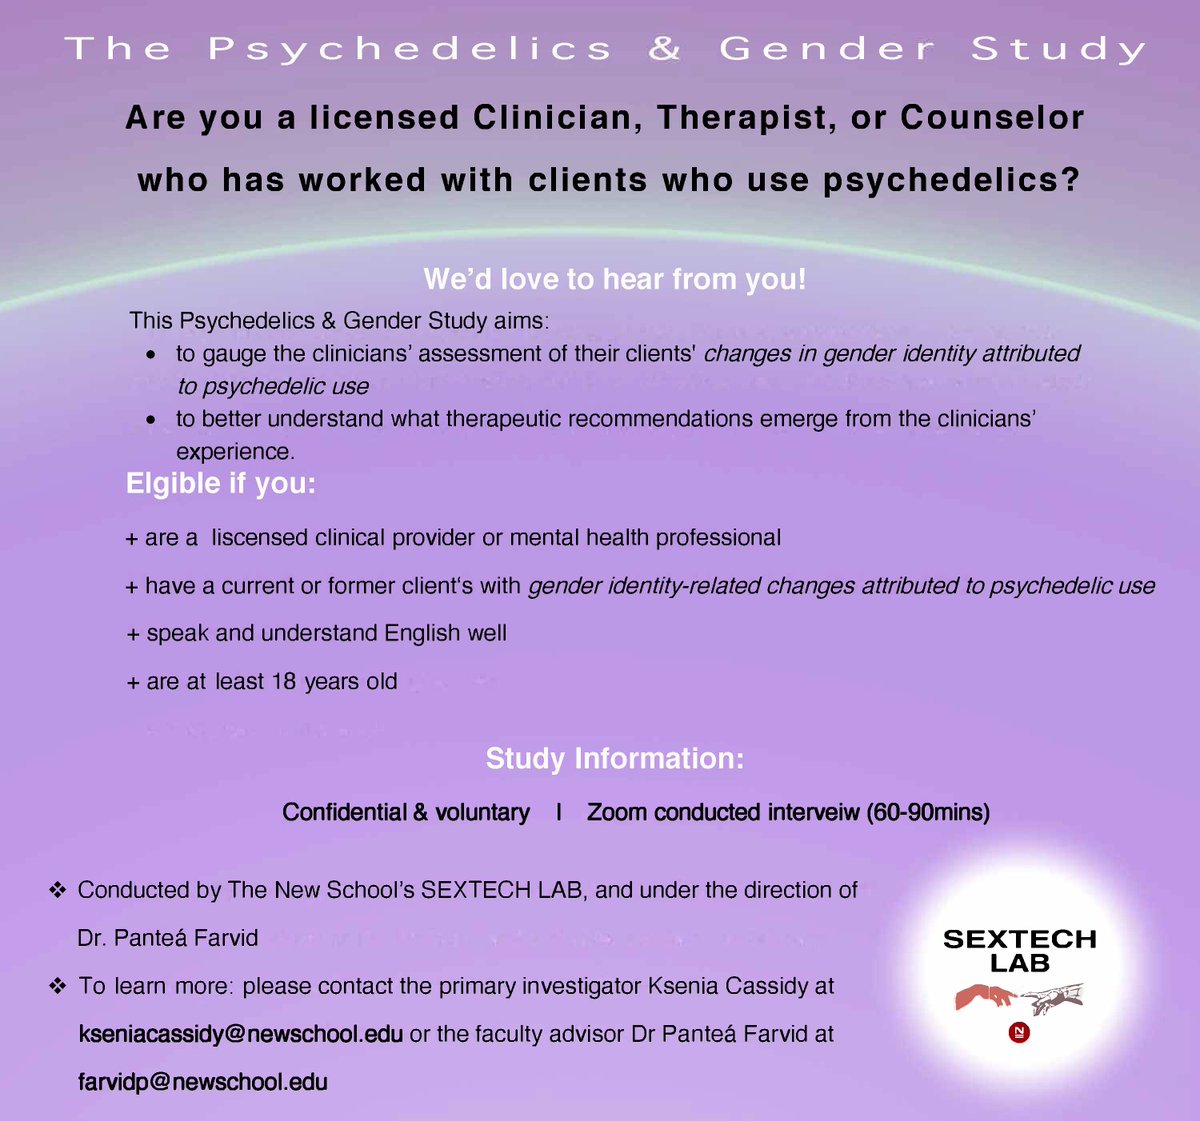 Actively recruiting licensed clinicians for our #psychedelics and #gender study - contact me or Dr @PaniFarvid to participate, and spread the word! #psychedelicresearch #genderdysphoria #sexuality #SexTechLab